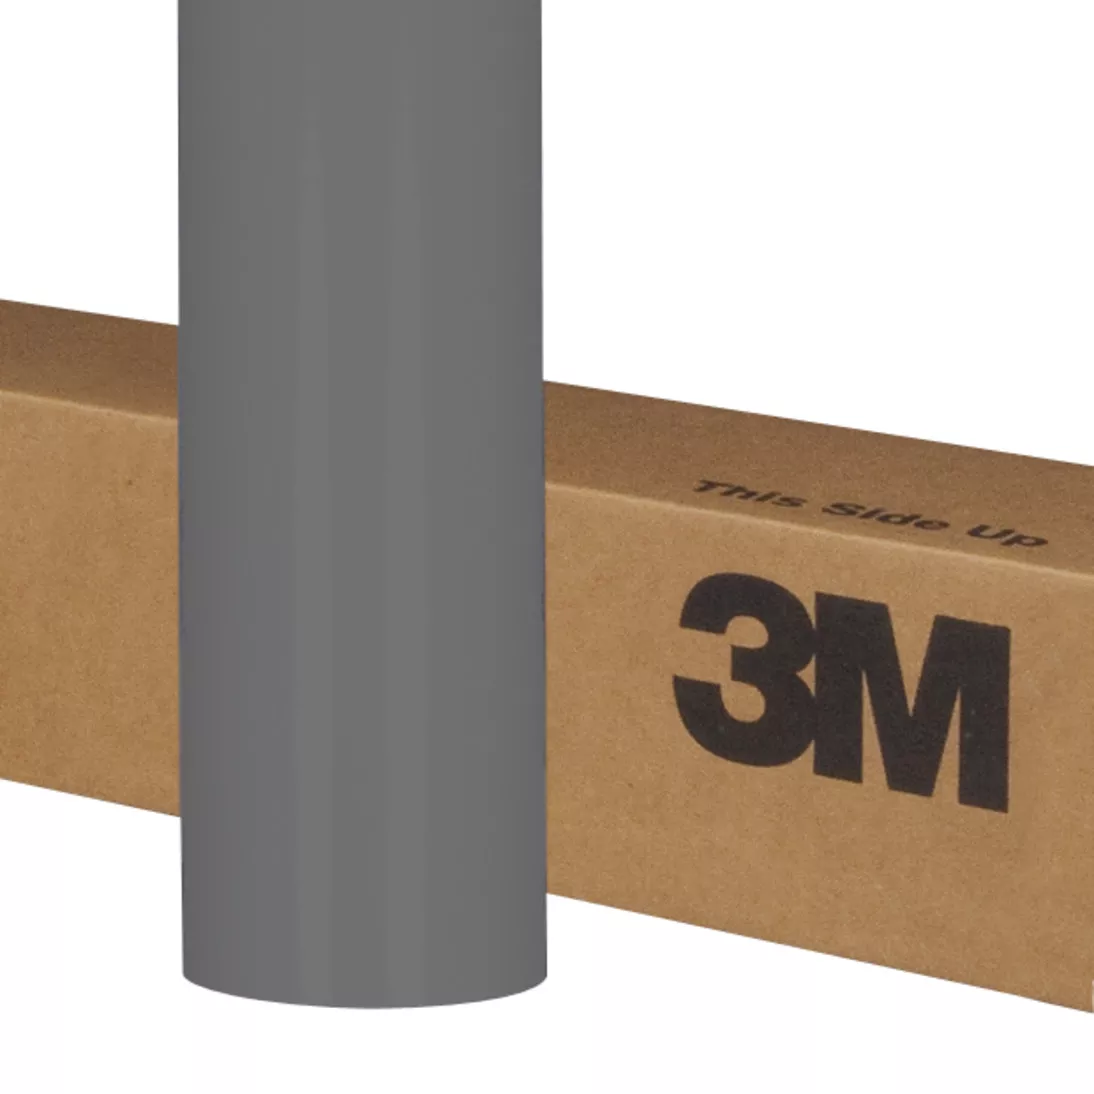 3M™ Scotchcal™ Translucent Graphic Film 3630-0222, Cool Gray, 48 in x 50
yd